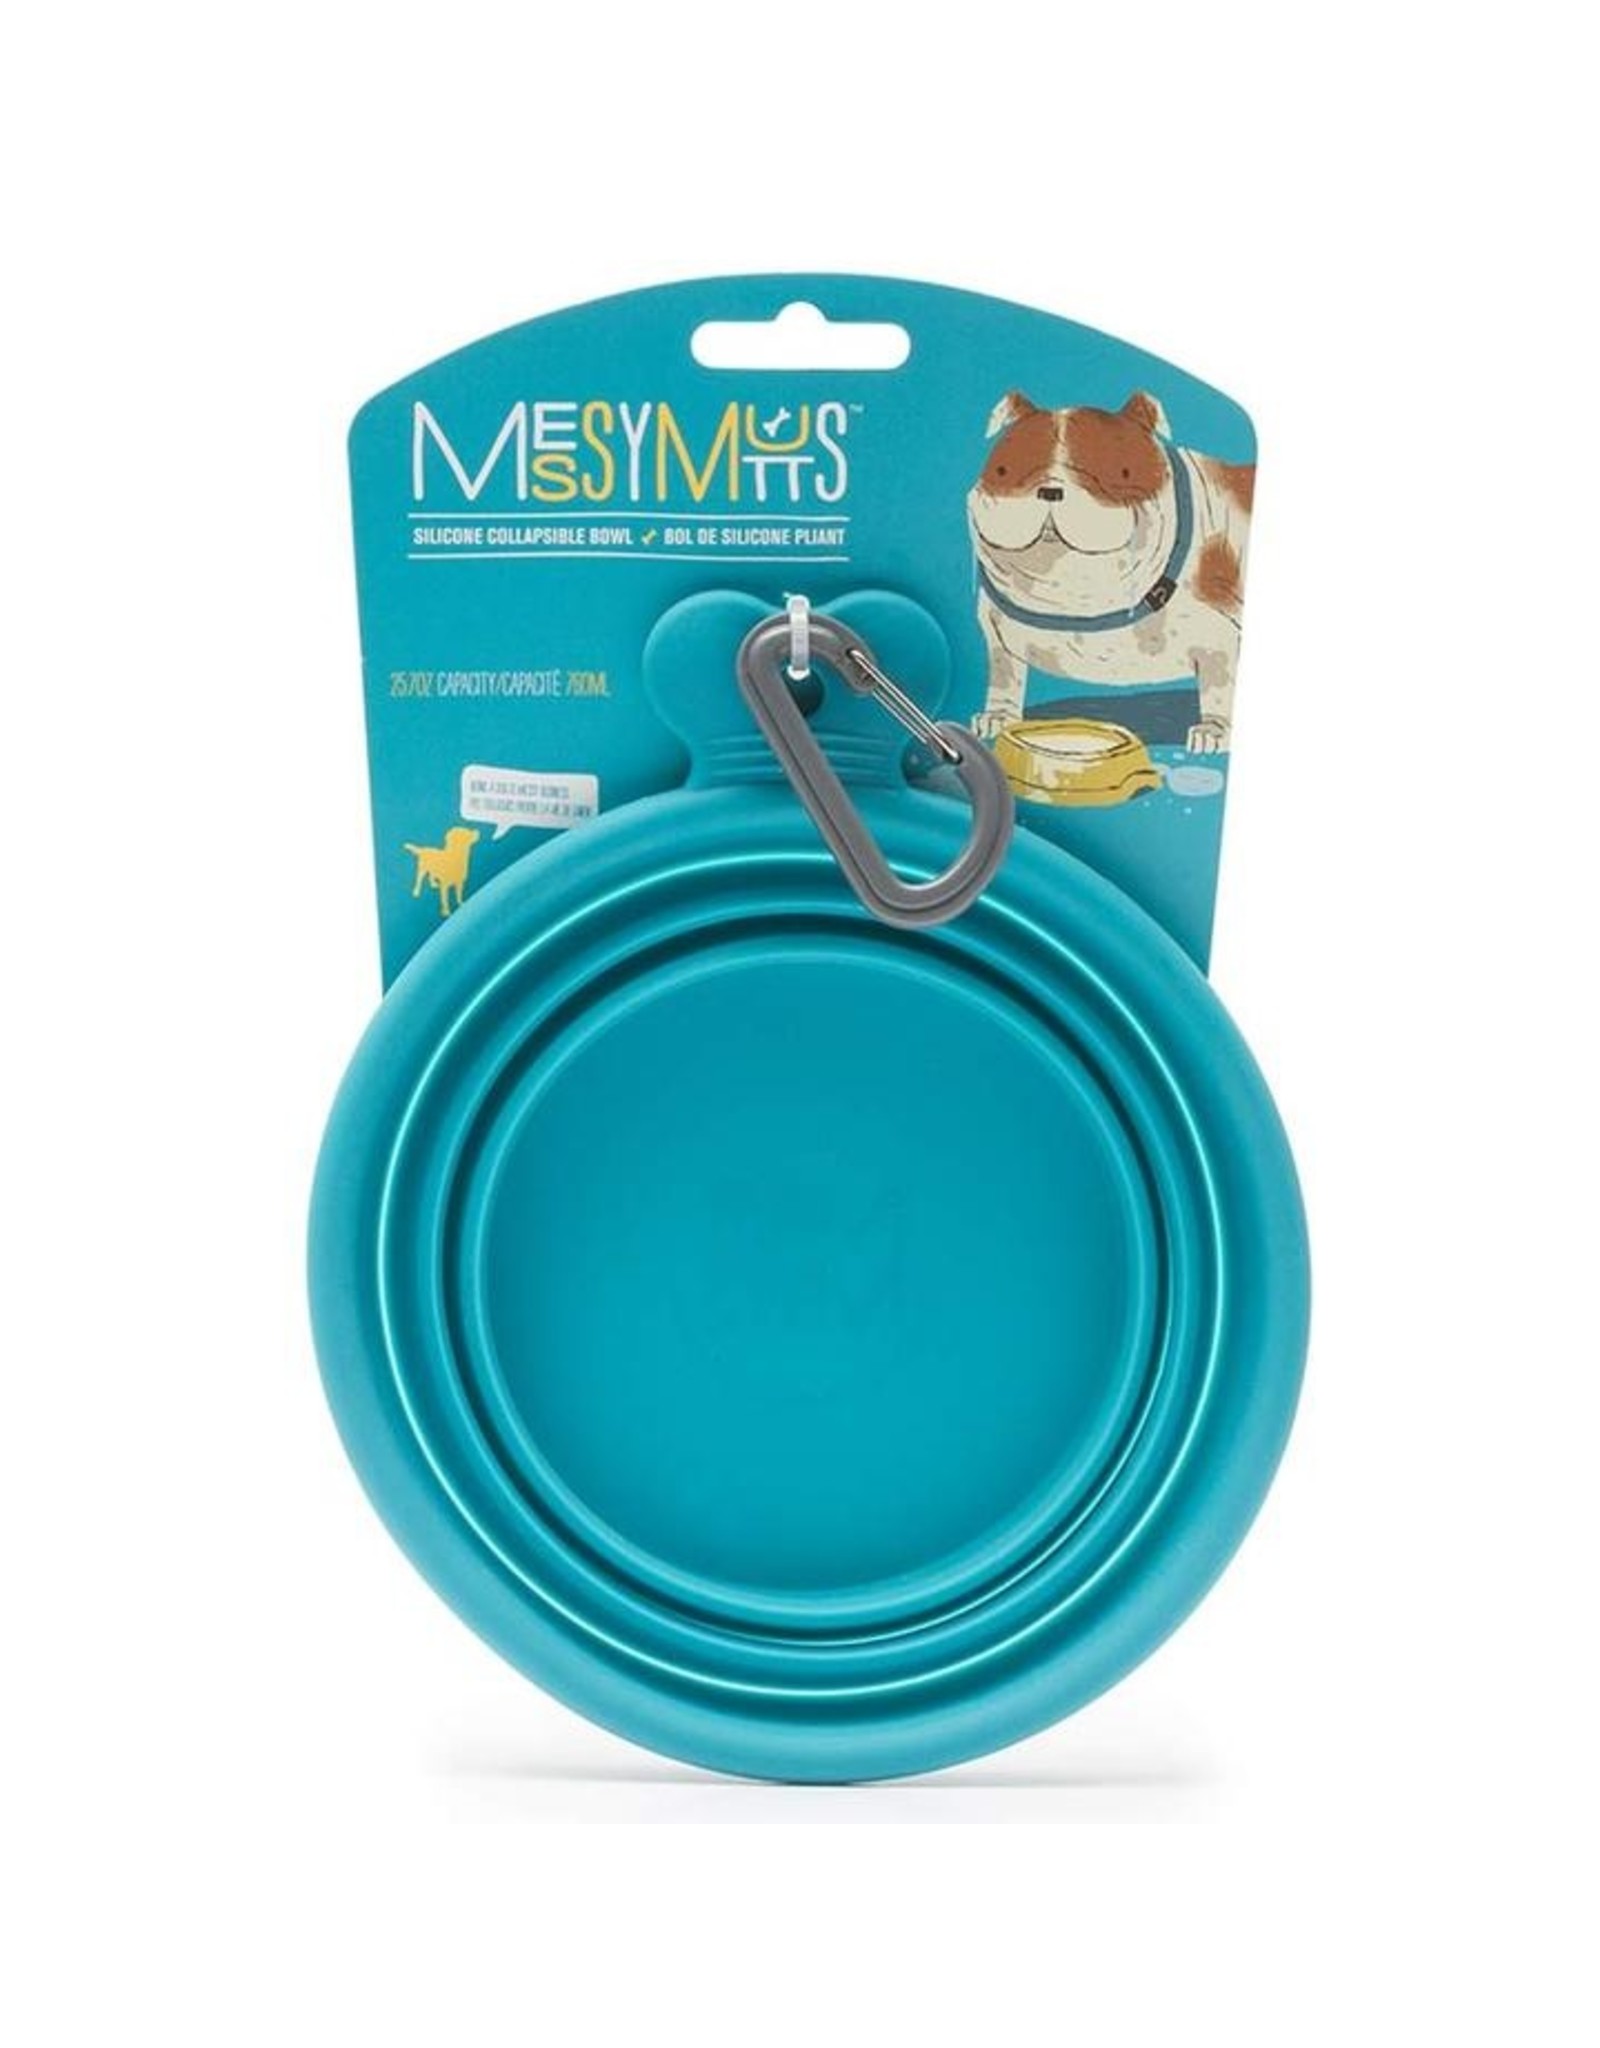 Messy Mutts MESSY MUTTS SILICONE COLLAPSIBLE BOWL